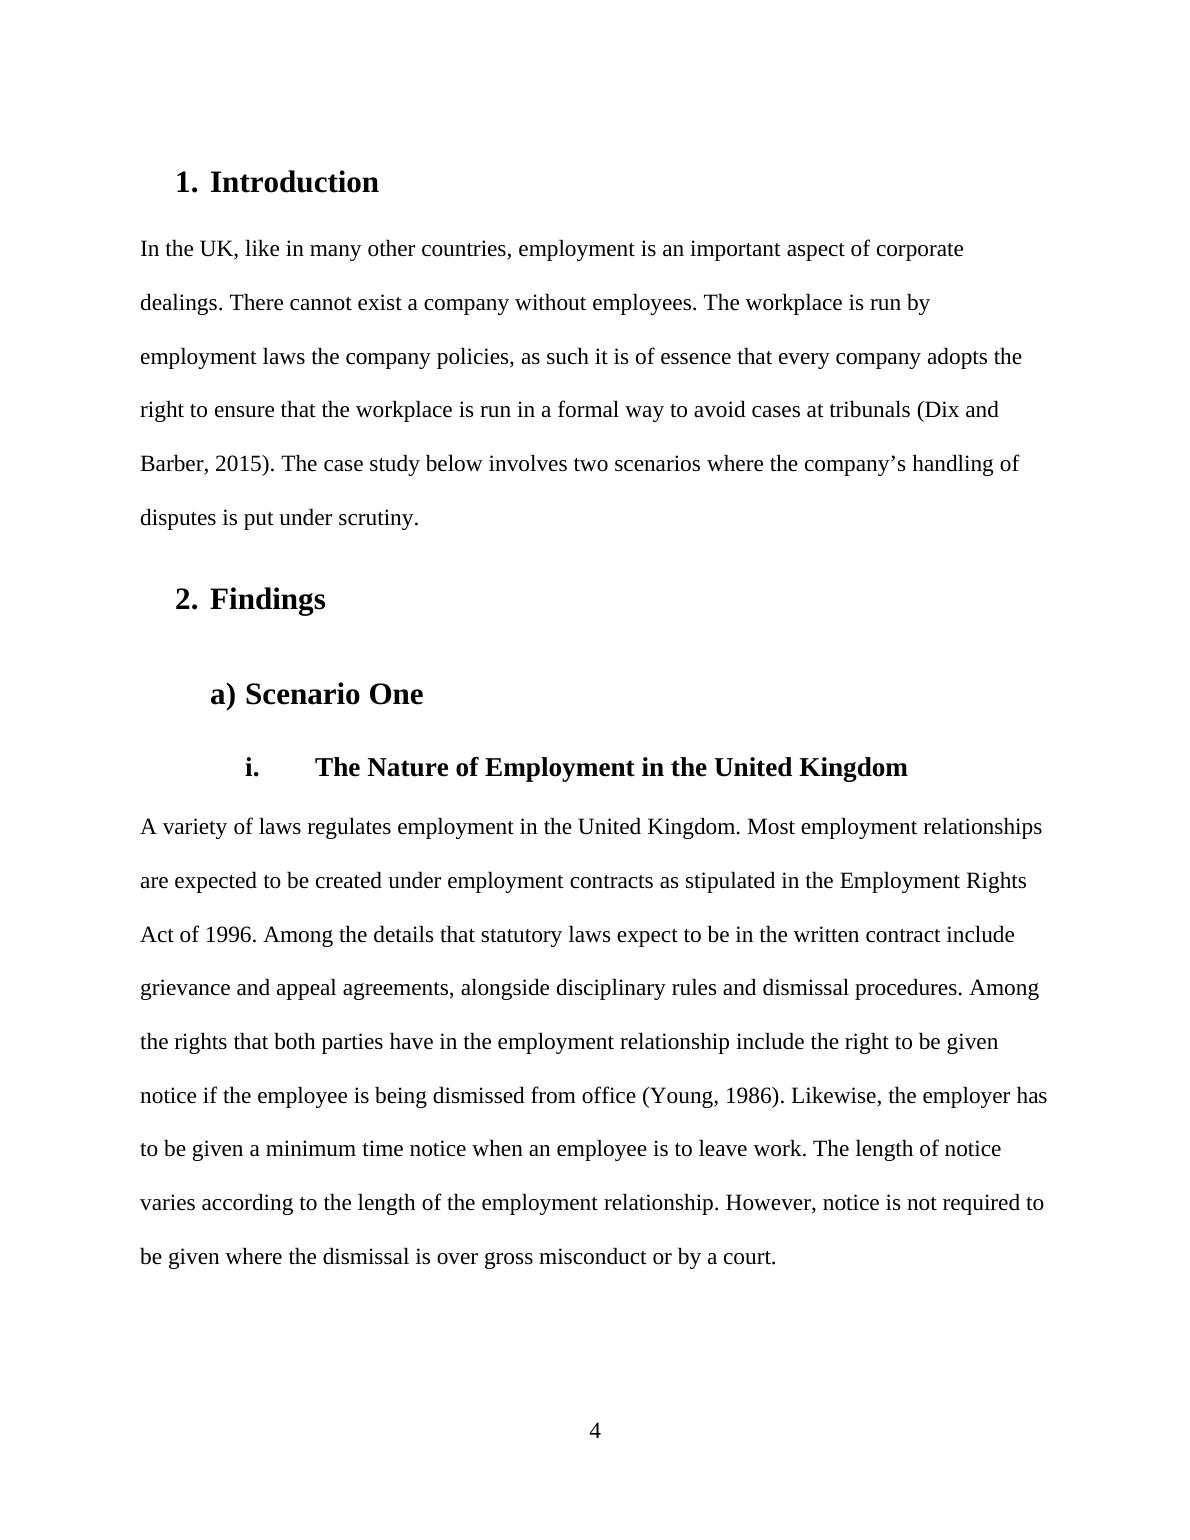 The Nature of Employment in the United Kingdom_4